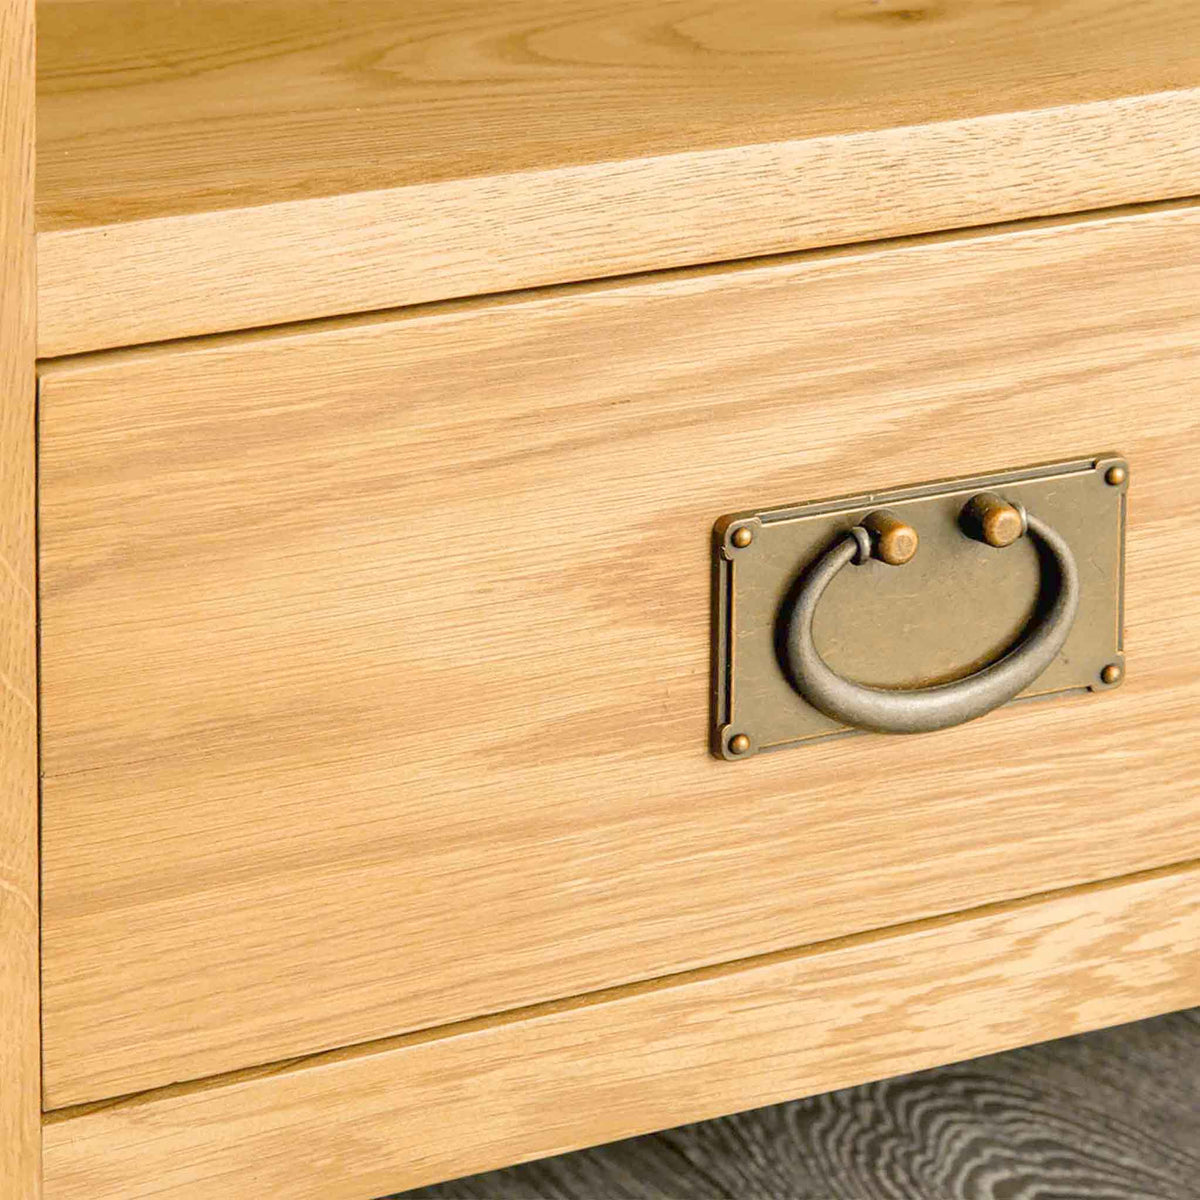 Surrey Oak Waxed Corner TV Stand - Close up of drawer handle